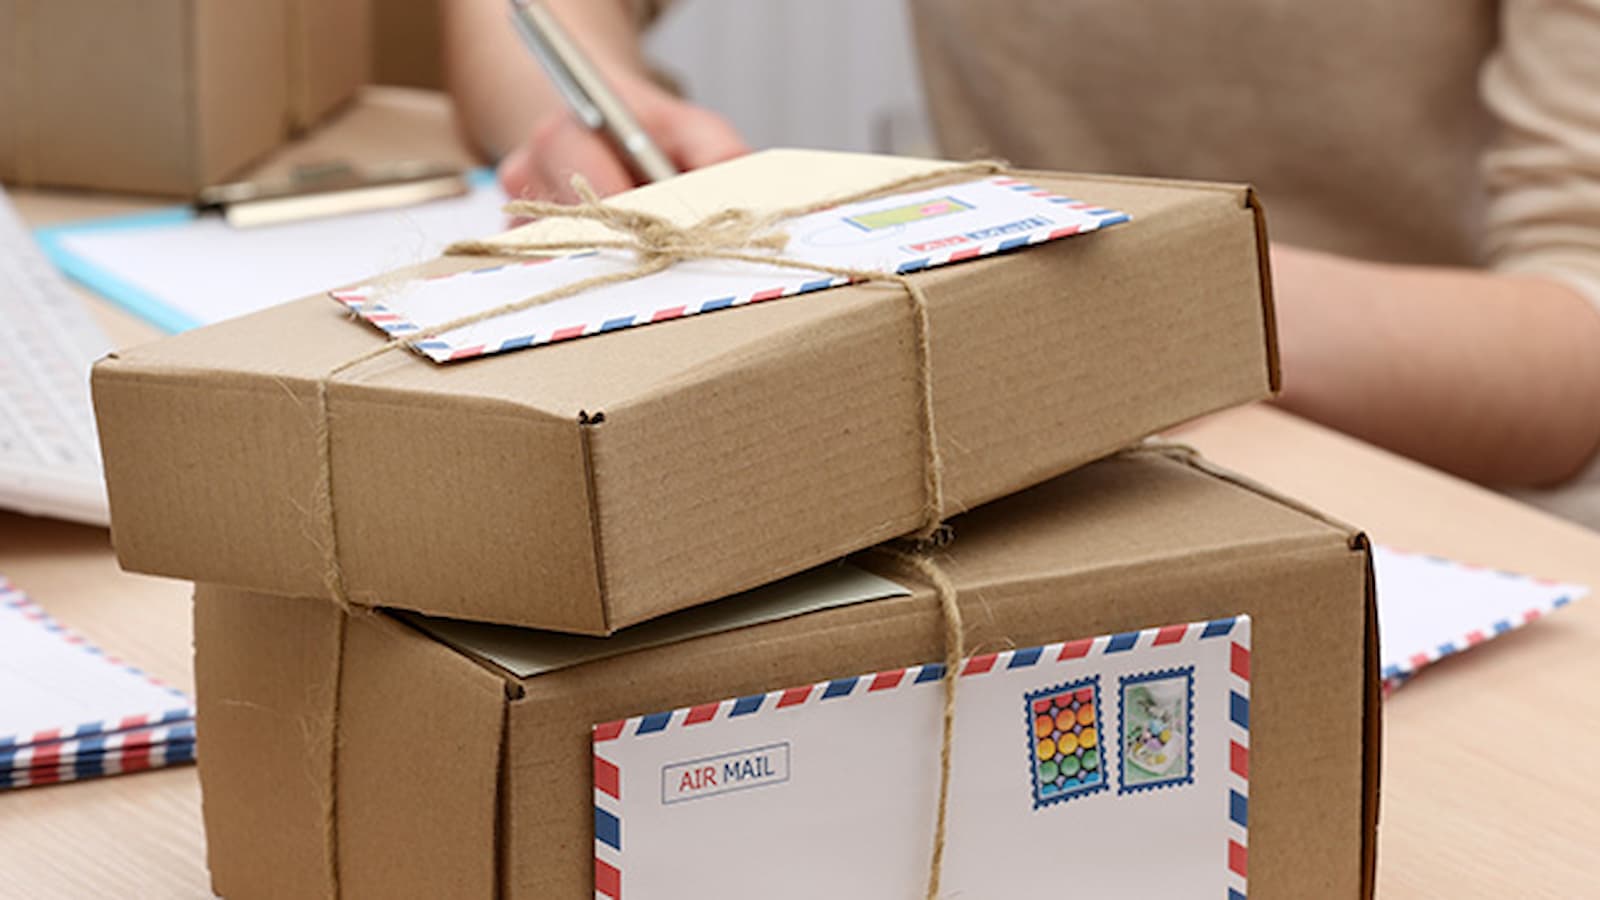 In the new year, USPS will charge a different rate for mailing a letter